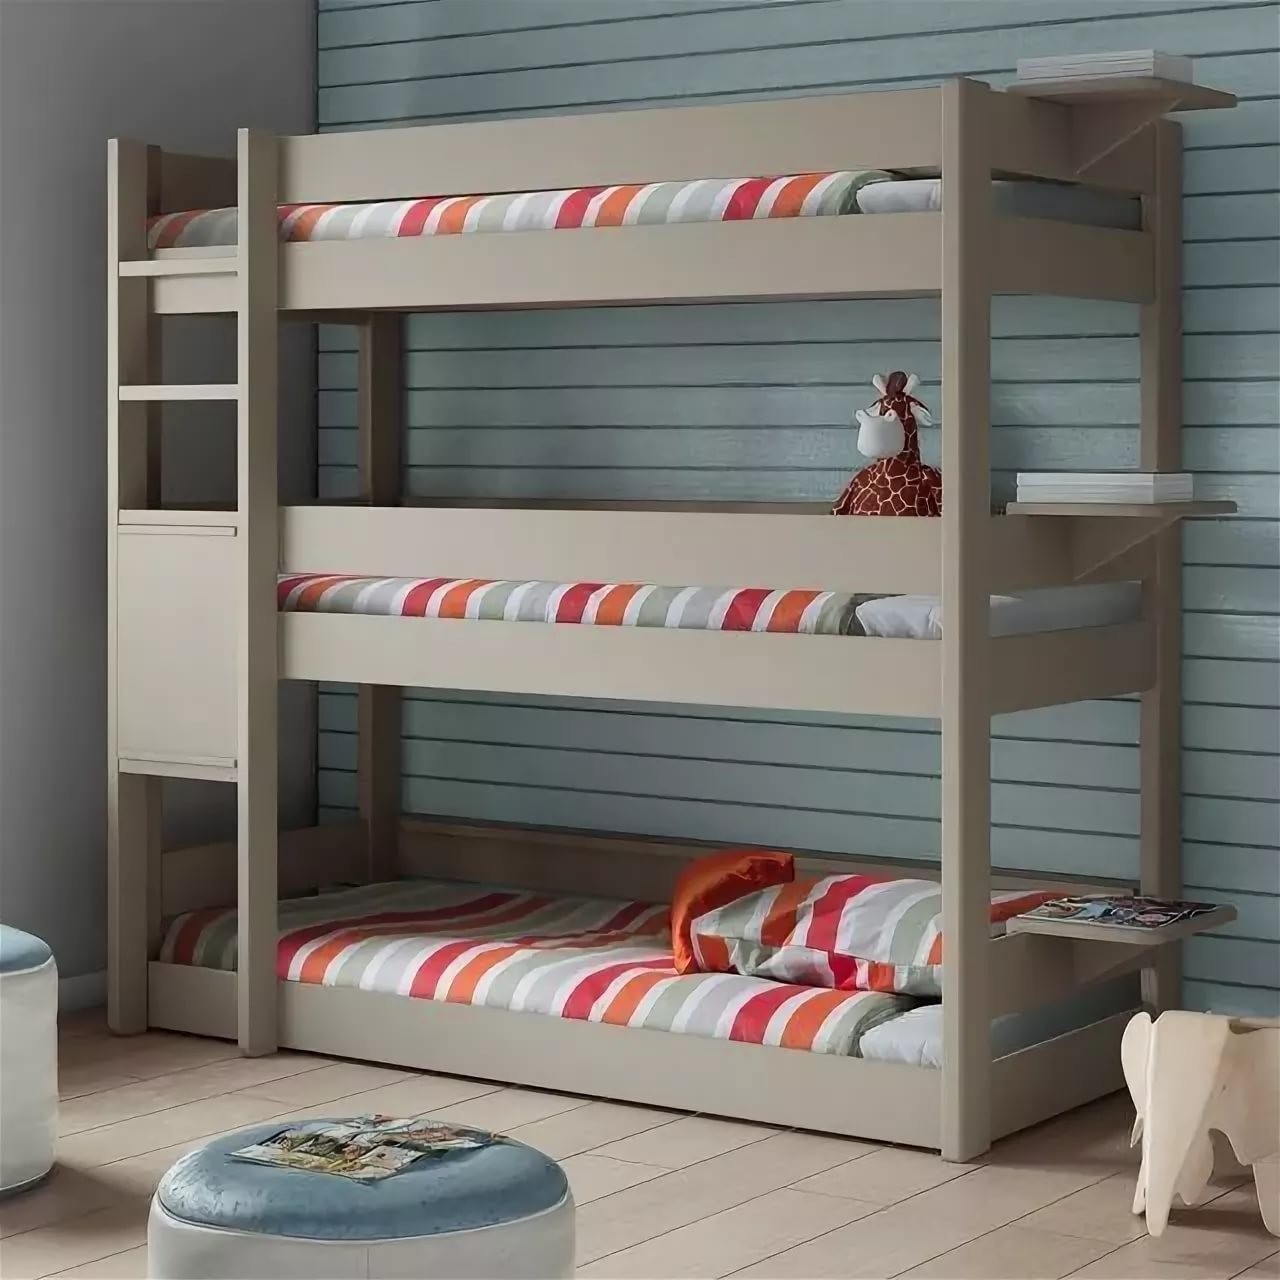 Triple bunk beds for kids rooms